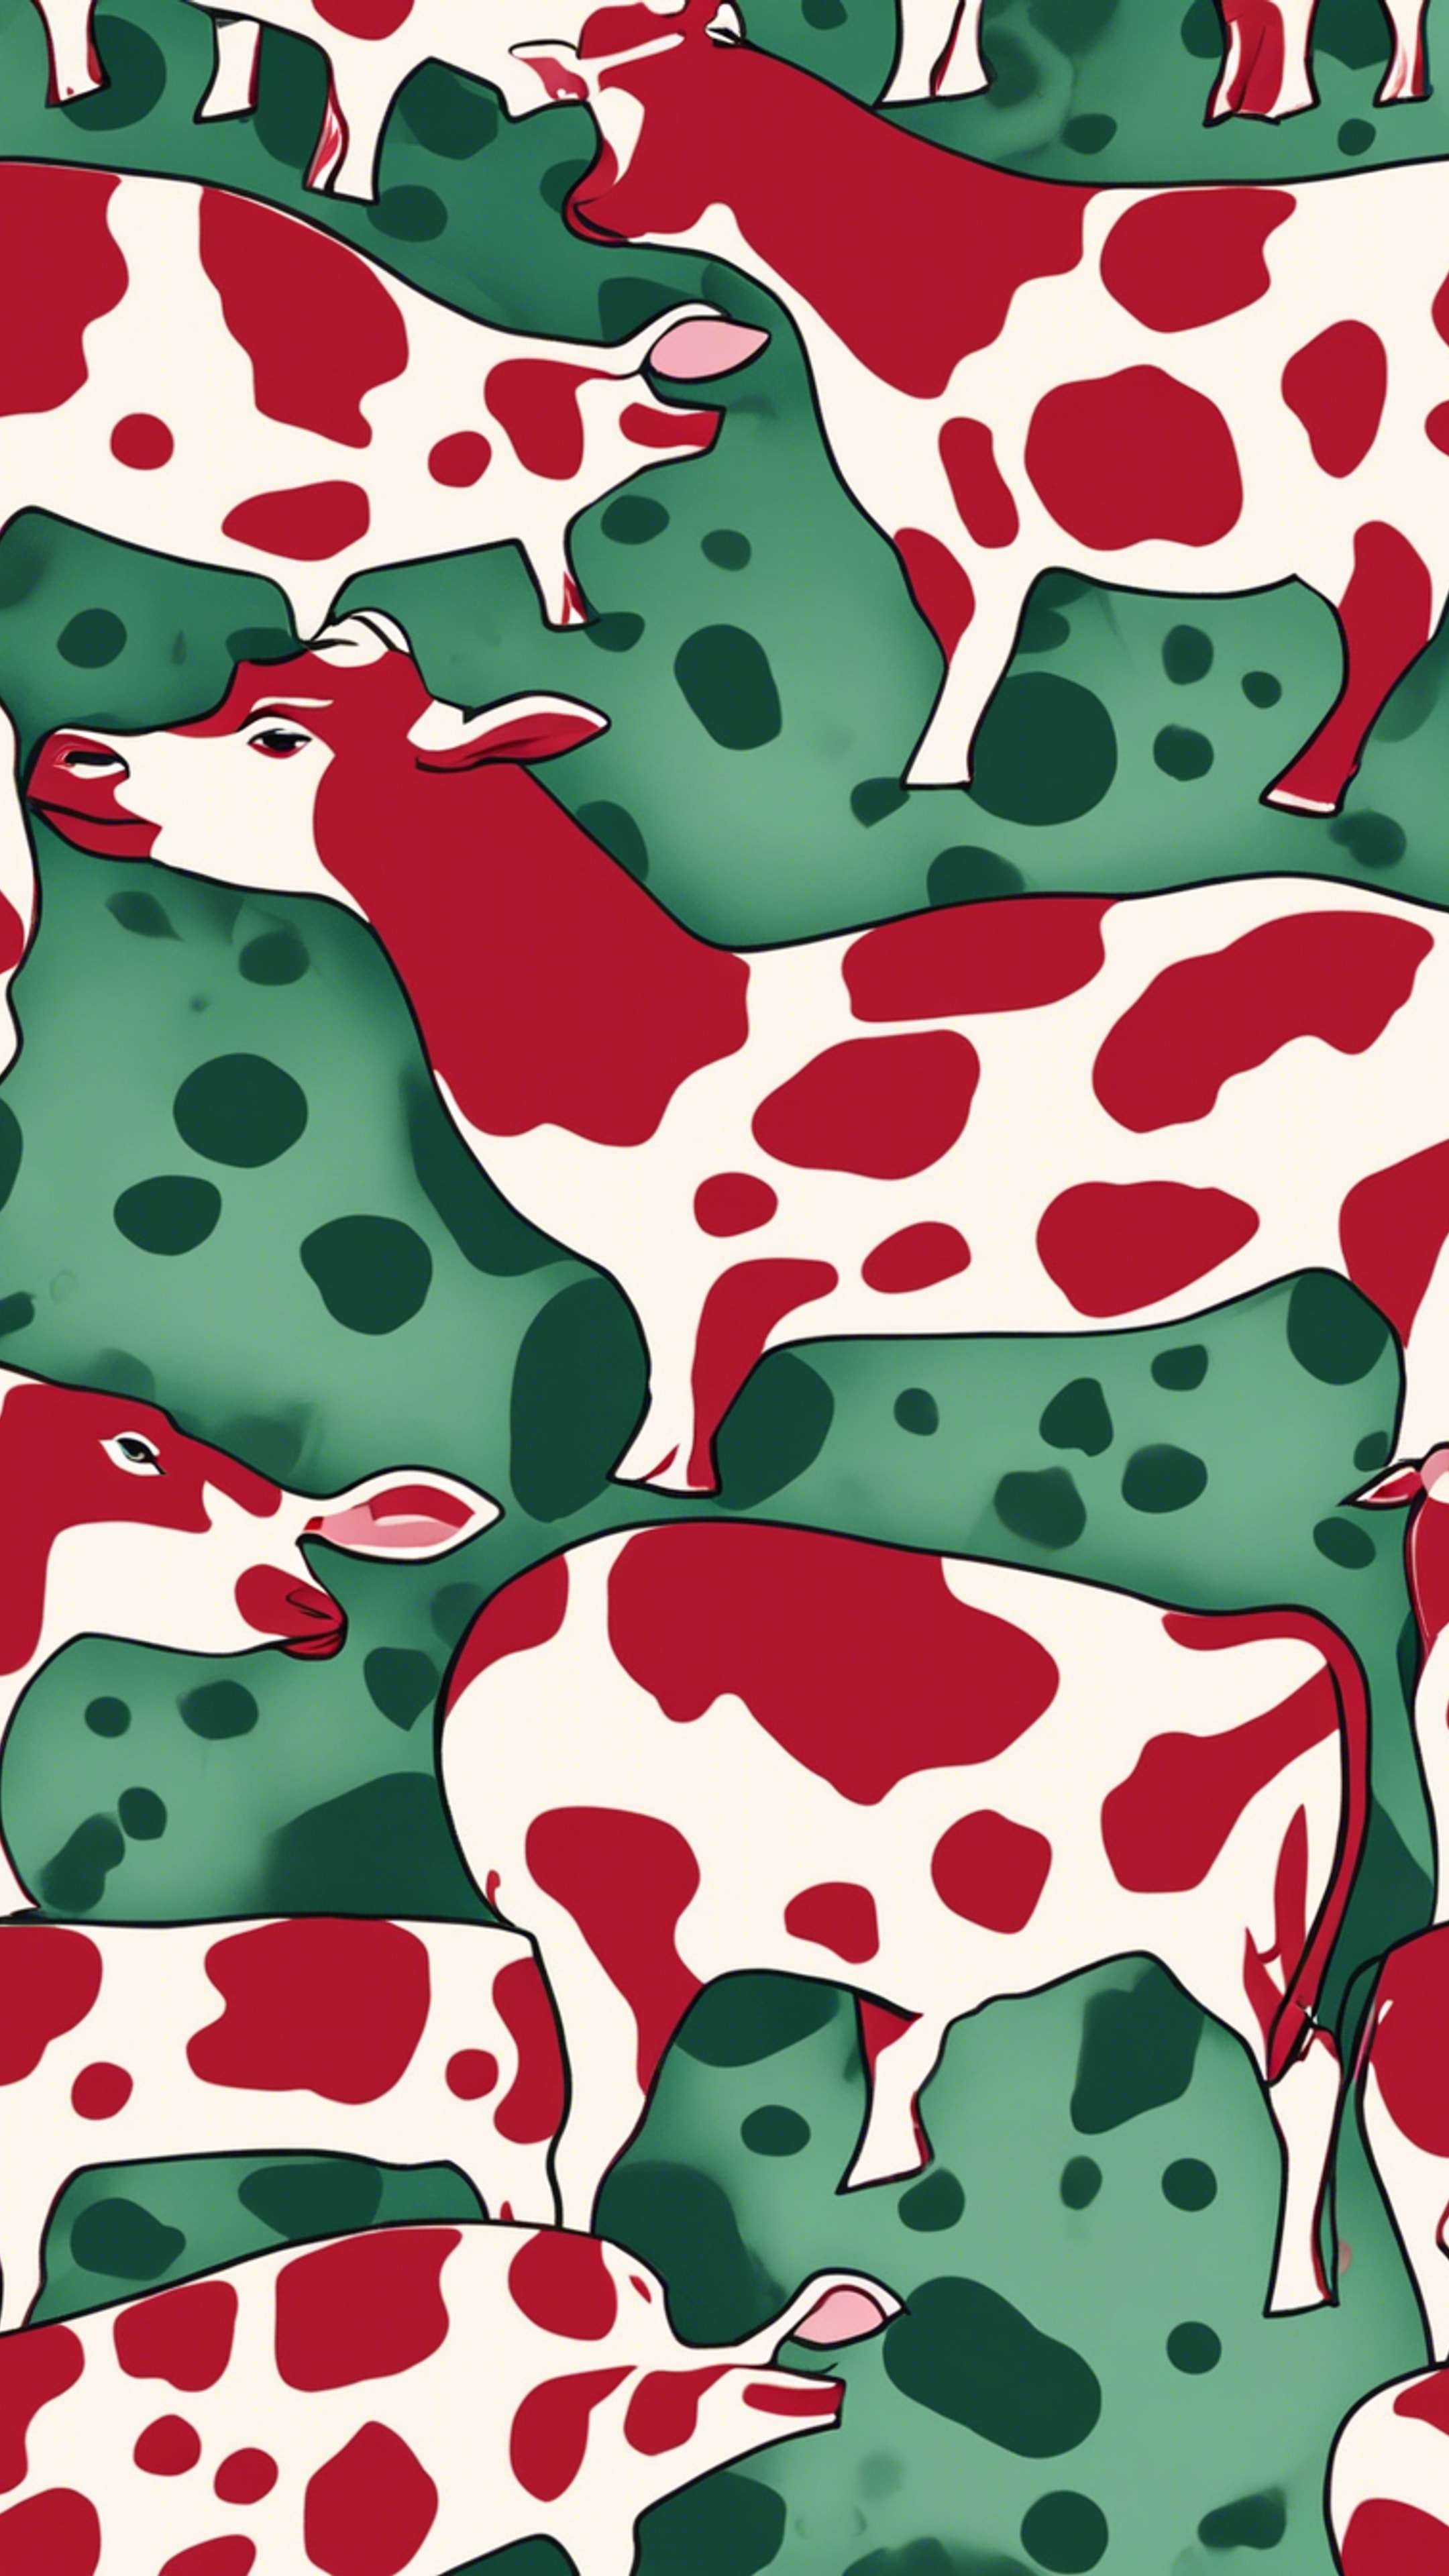 A dynamic, textured pattern of red and green cow spots. Tapetai[159333102a774de6a0e2]